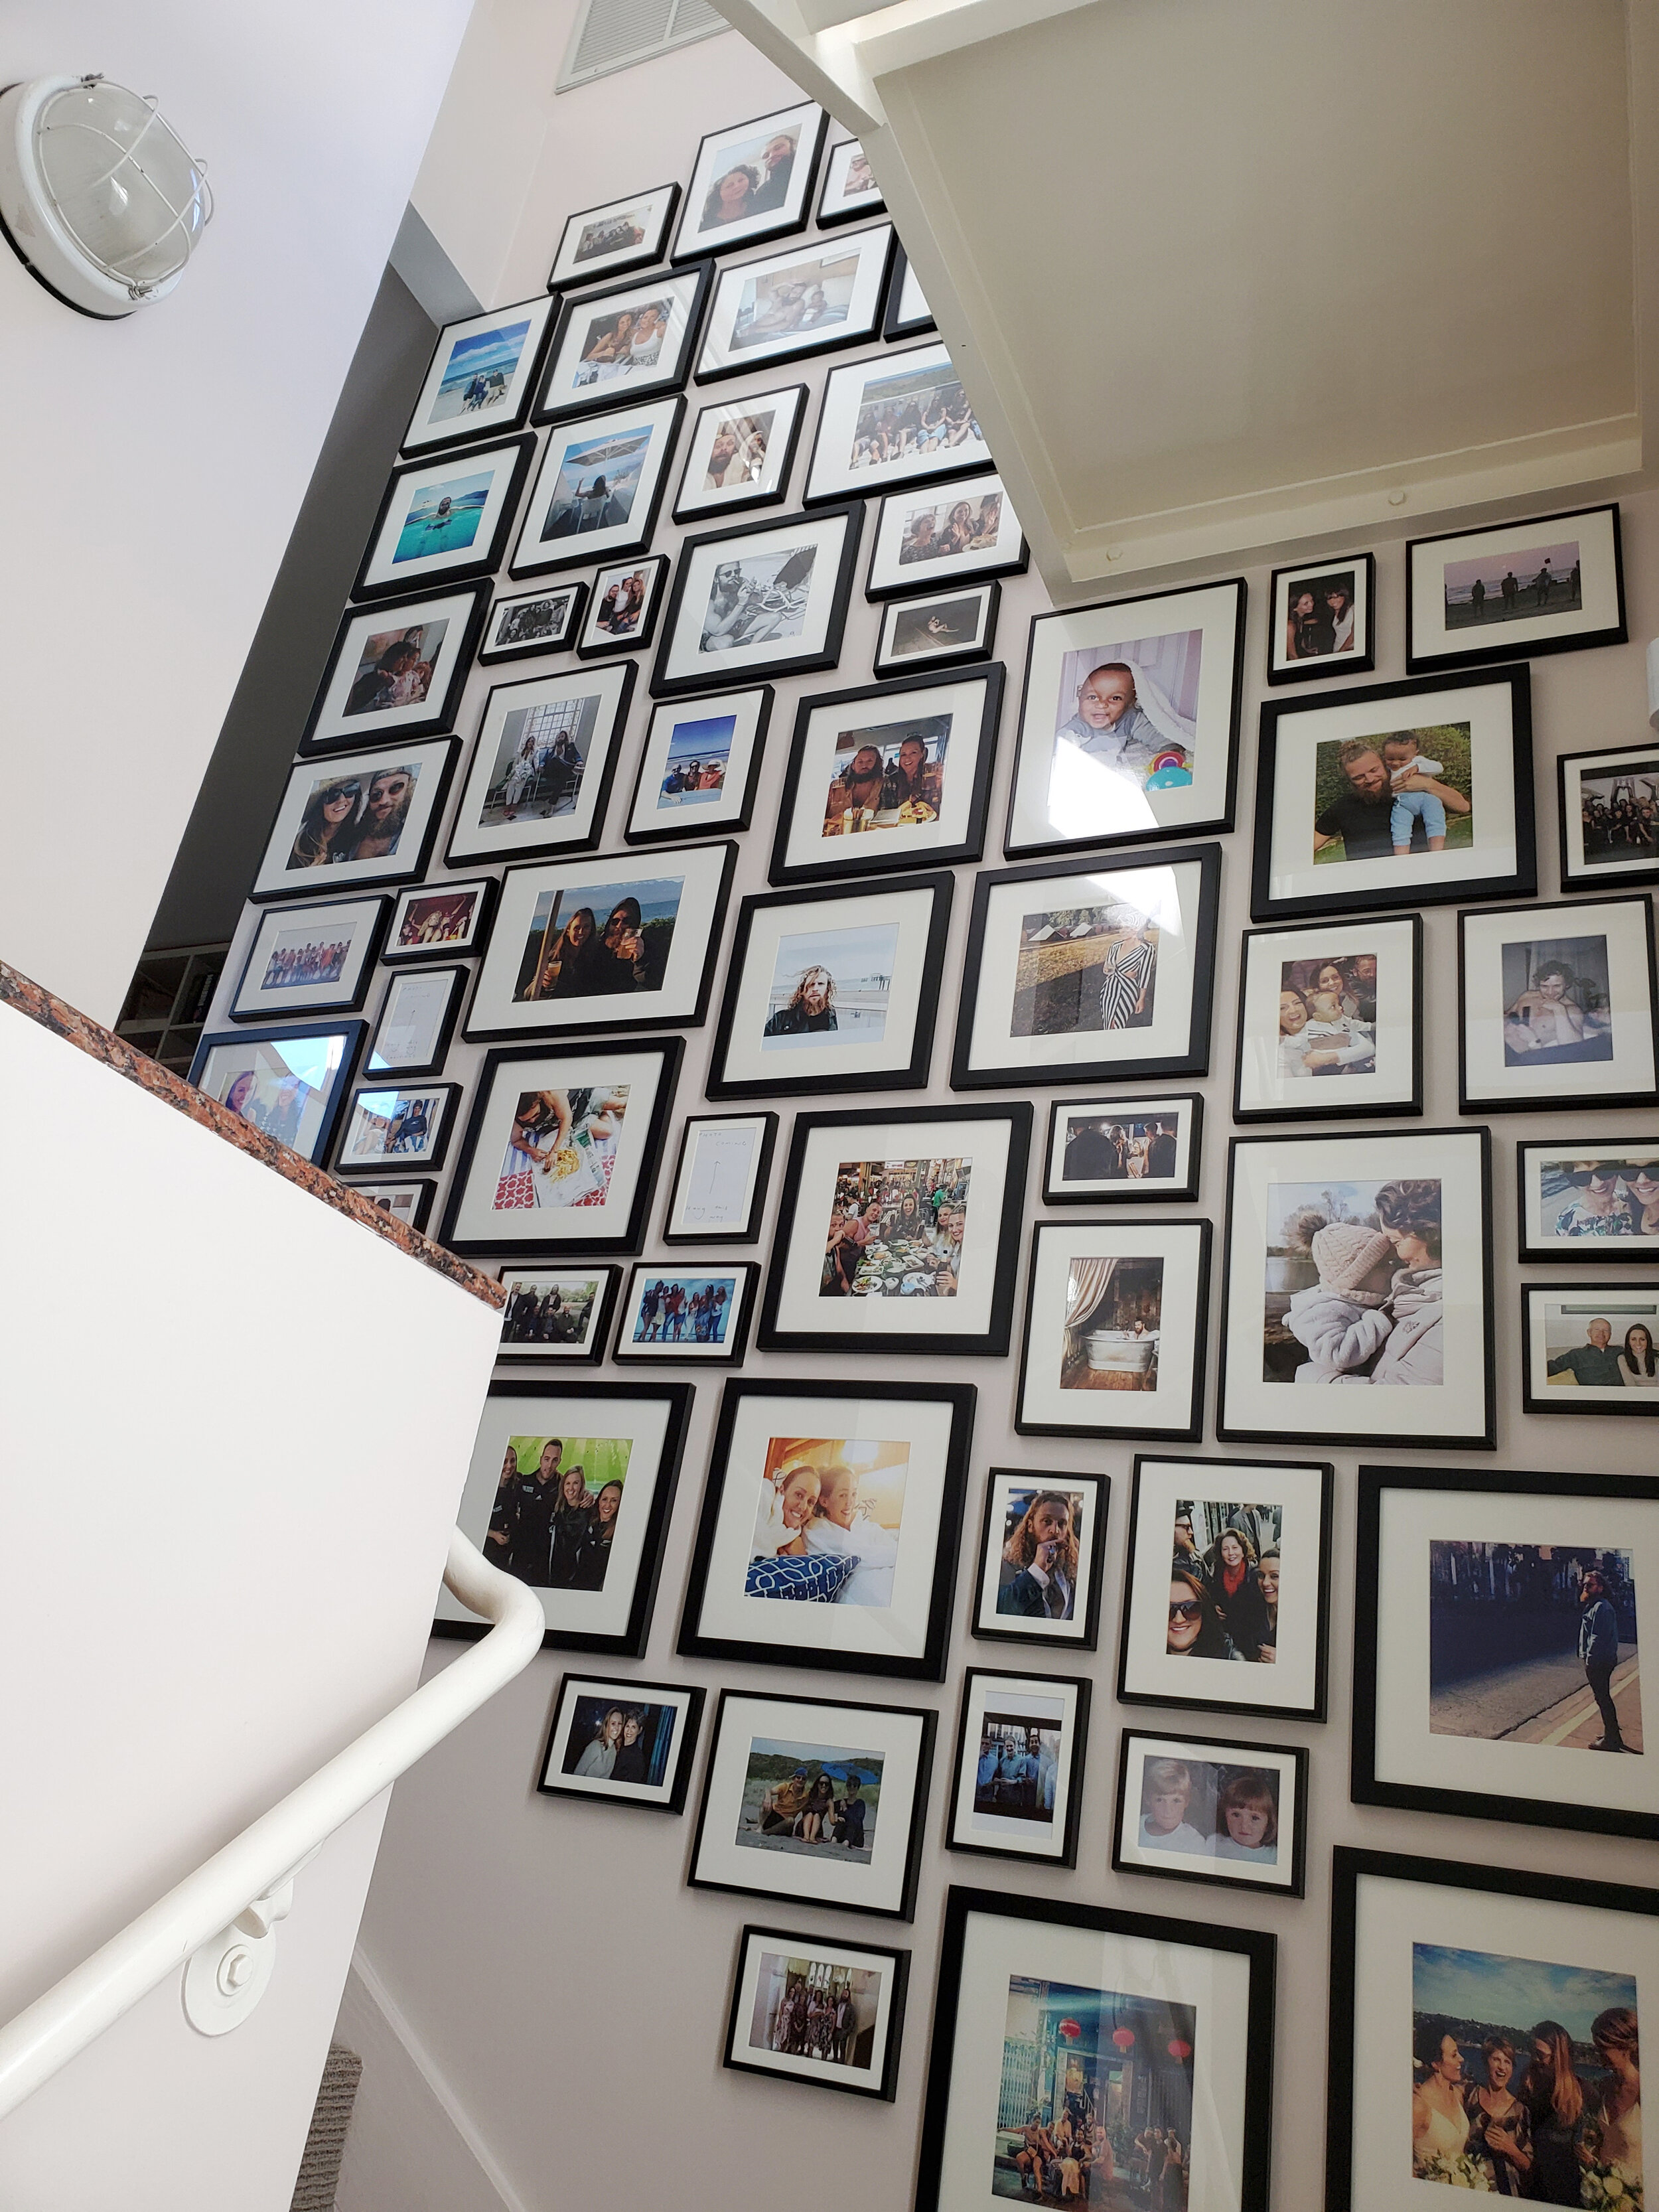 64 Piece Stairwell Gallery - Well Hung Picture Hanging